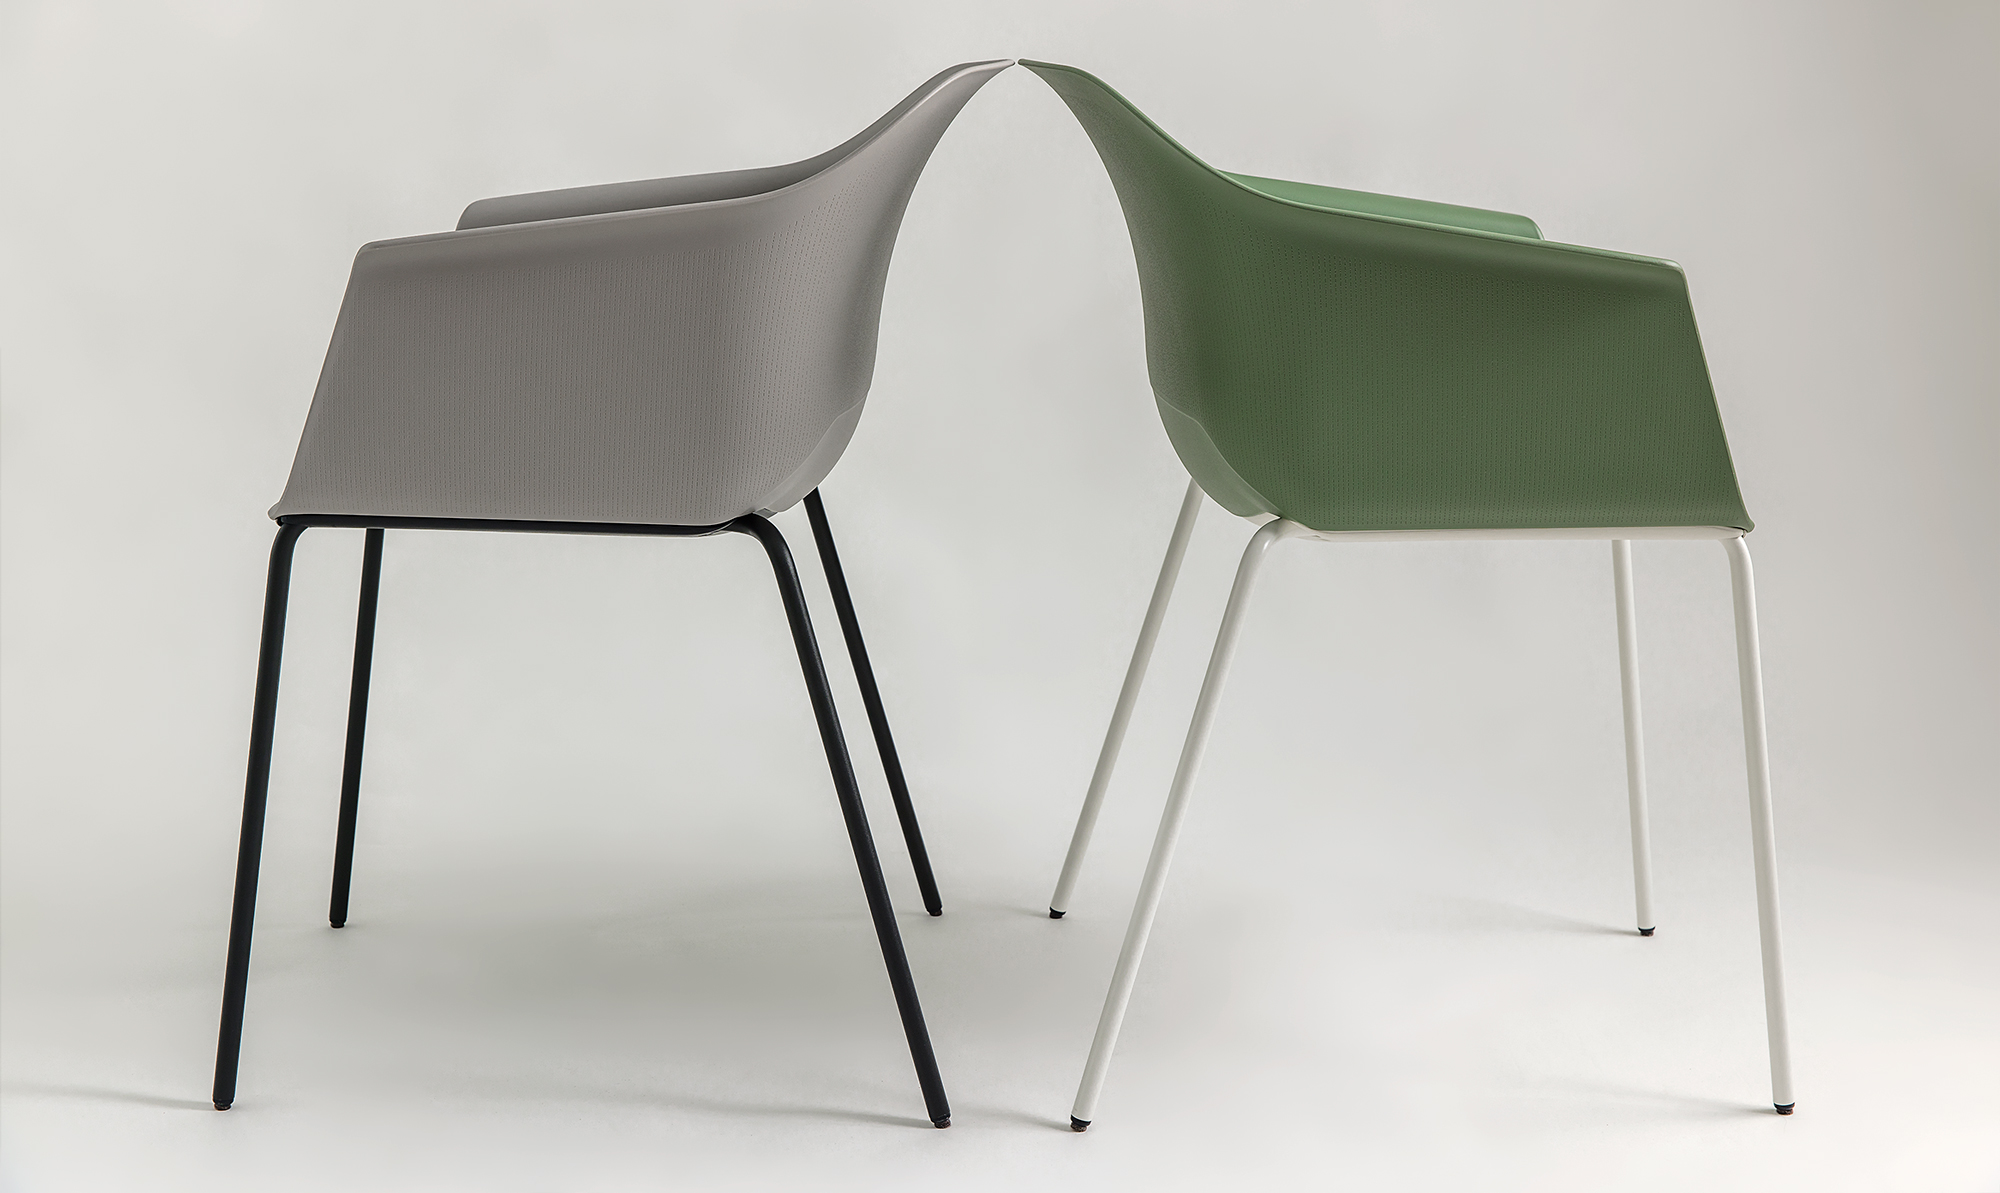 Side view of two Noom 60 chairs designed by Alegre Design for Actiu, positioned back-to-back. One chair is light gray with thin, black metal legs, while the other is olive green with thin, white metal legs. Both chairs feature a curved, bucket-style seat with integrated armrests, emphasizing their sleek and minimalist design.